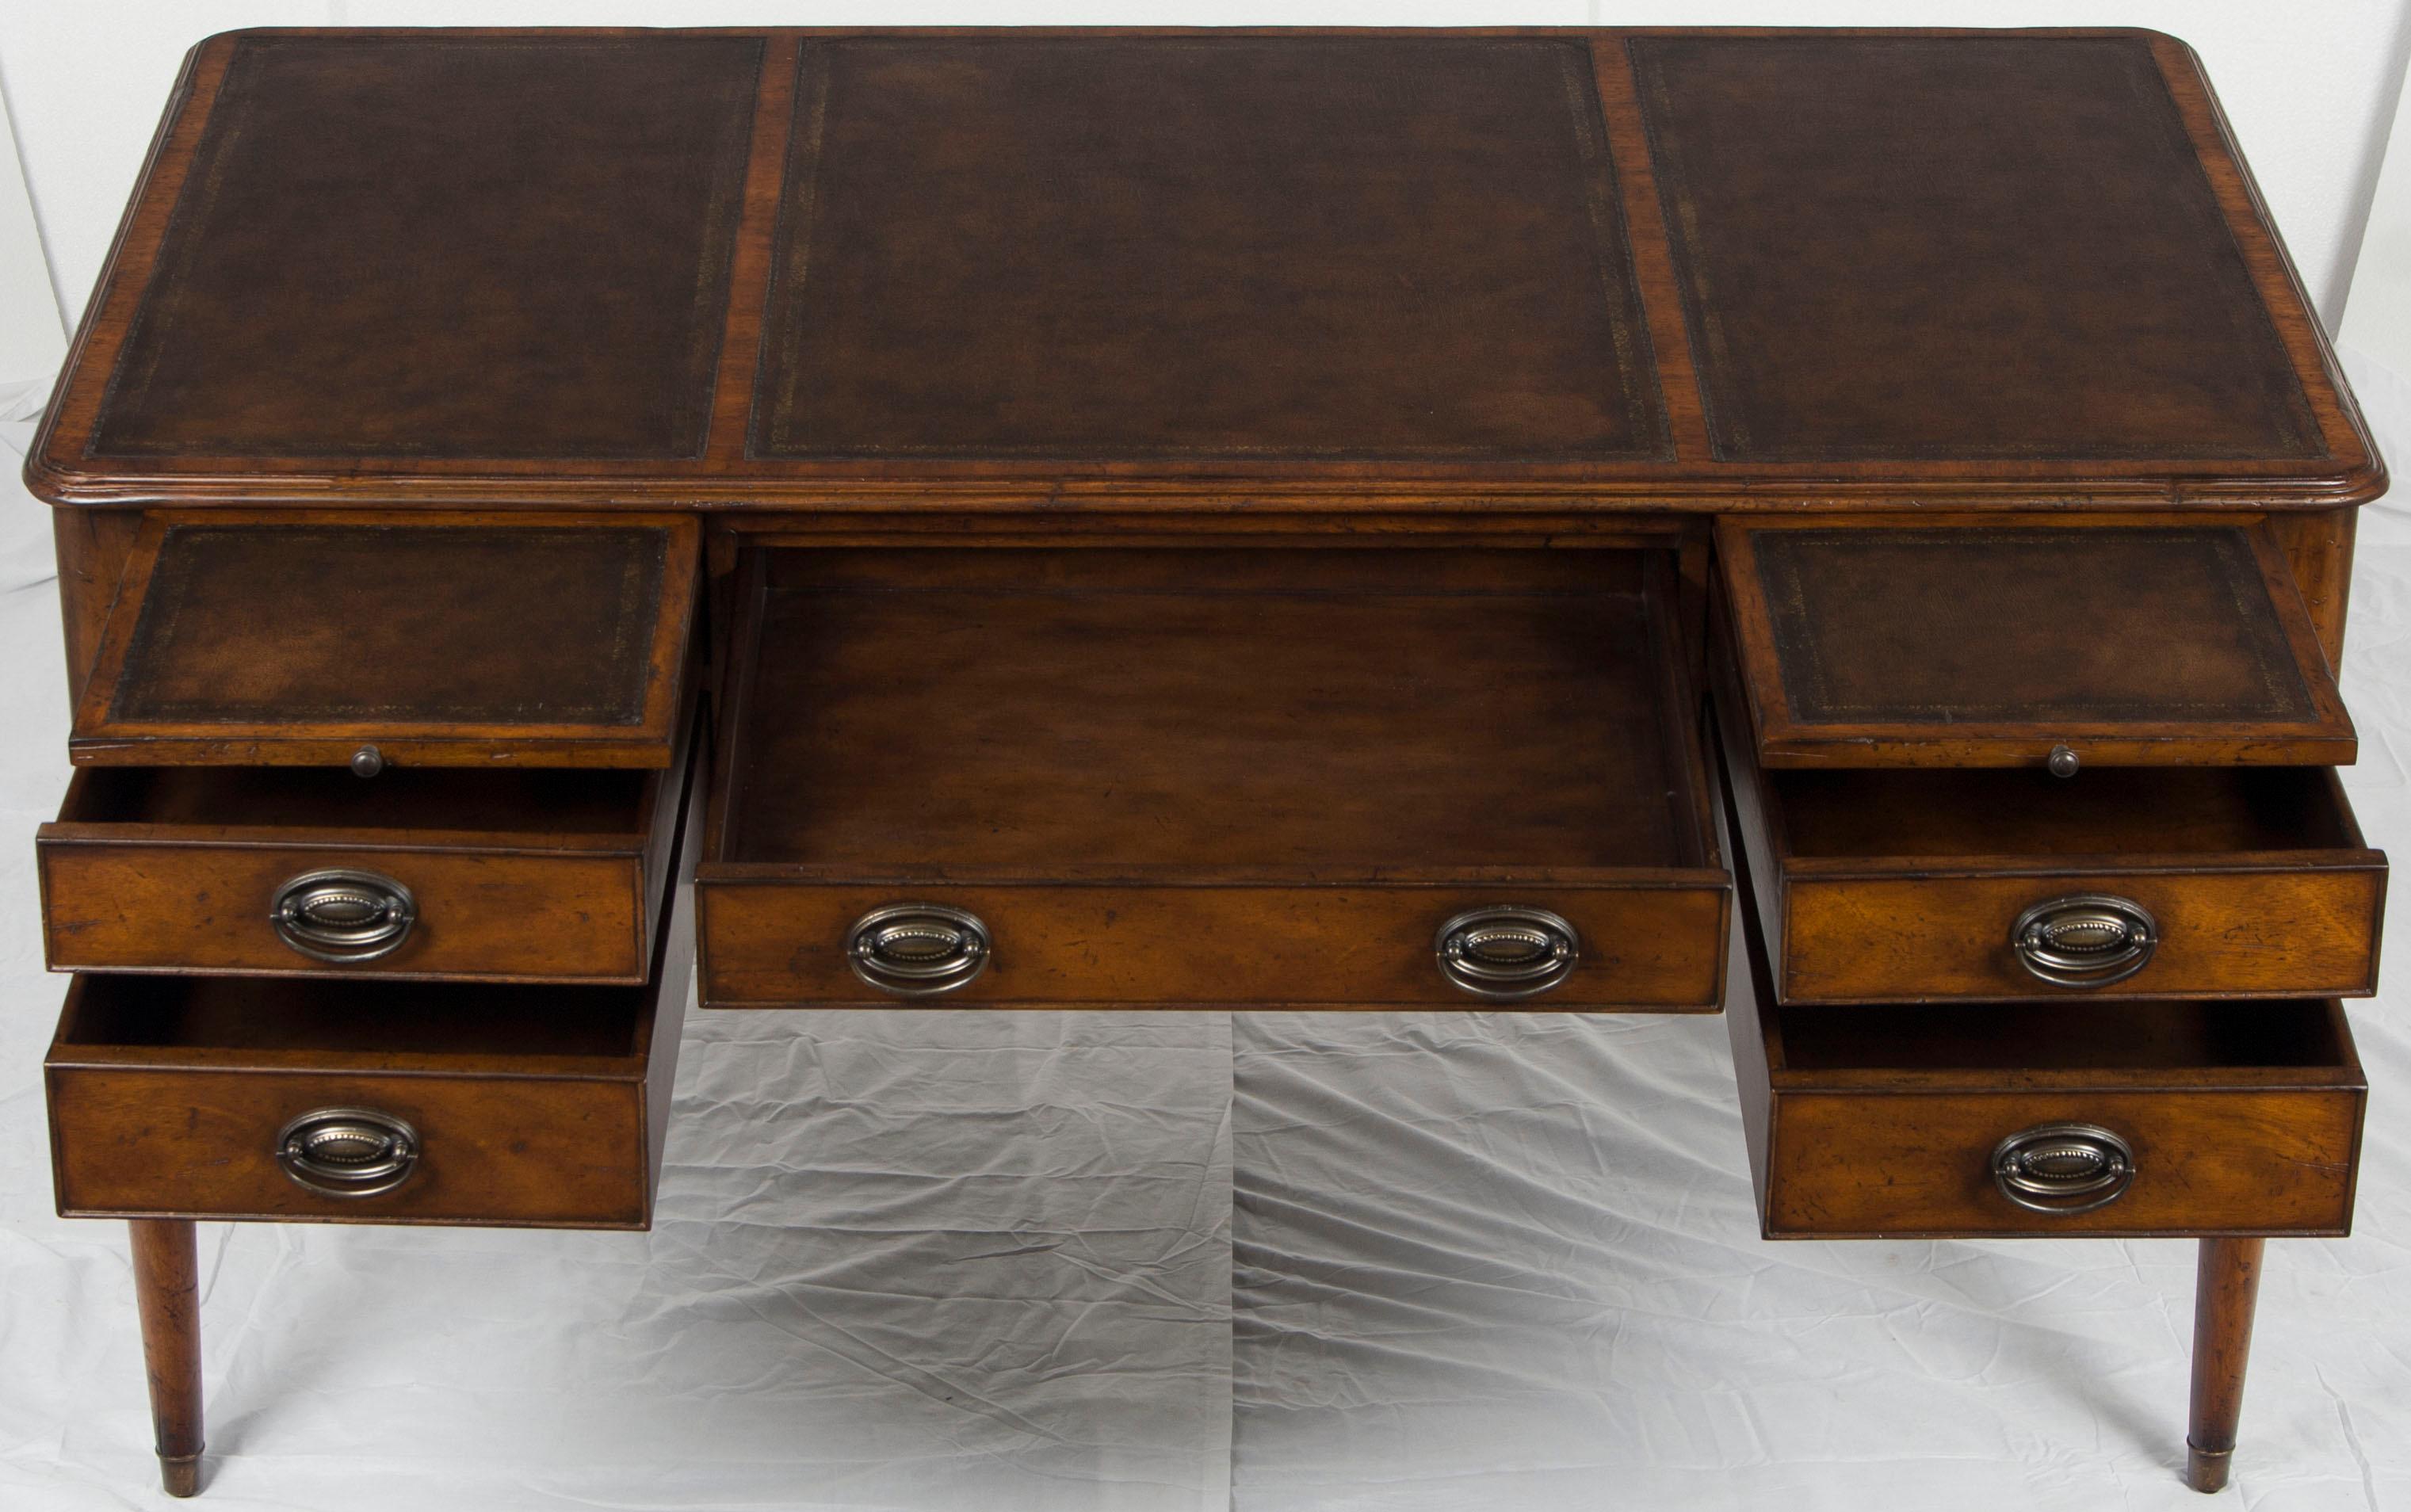 This is a brand new, heirloom quality desk on legs. Its heritage began recently when it was carefully handcrafted using only the finest hand techniques. From their selection of fine mahogany wood and gorgeous brown leather to the hand cut dovetails,